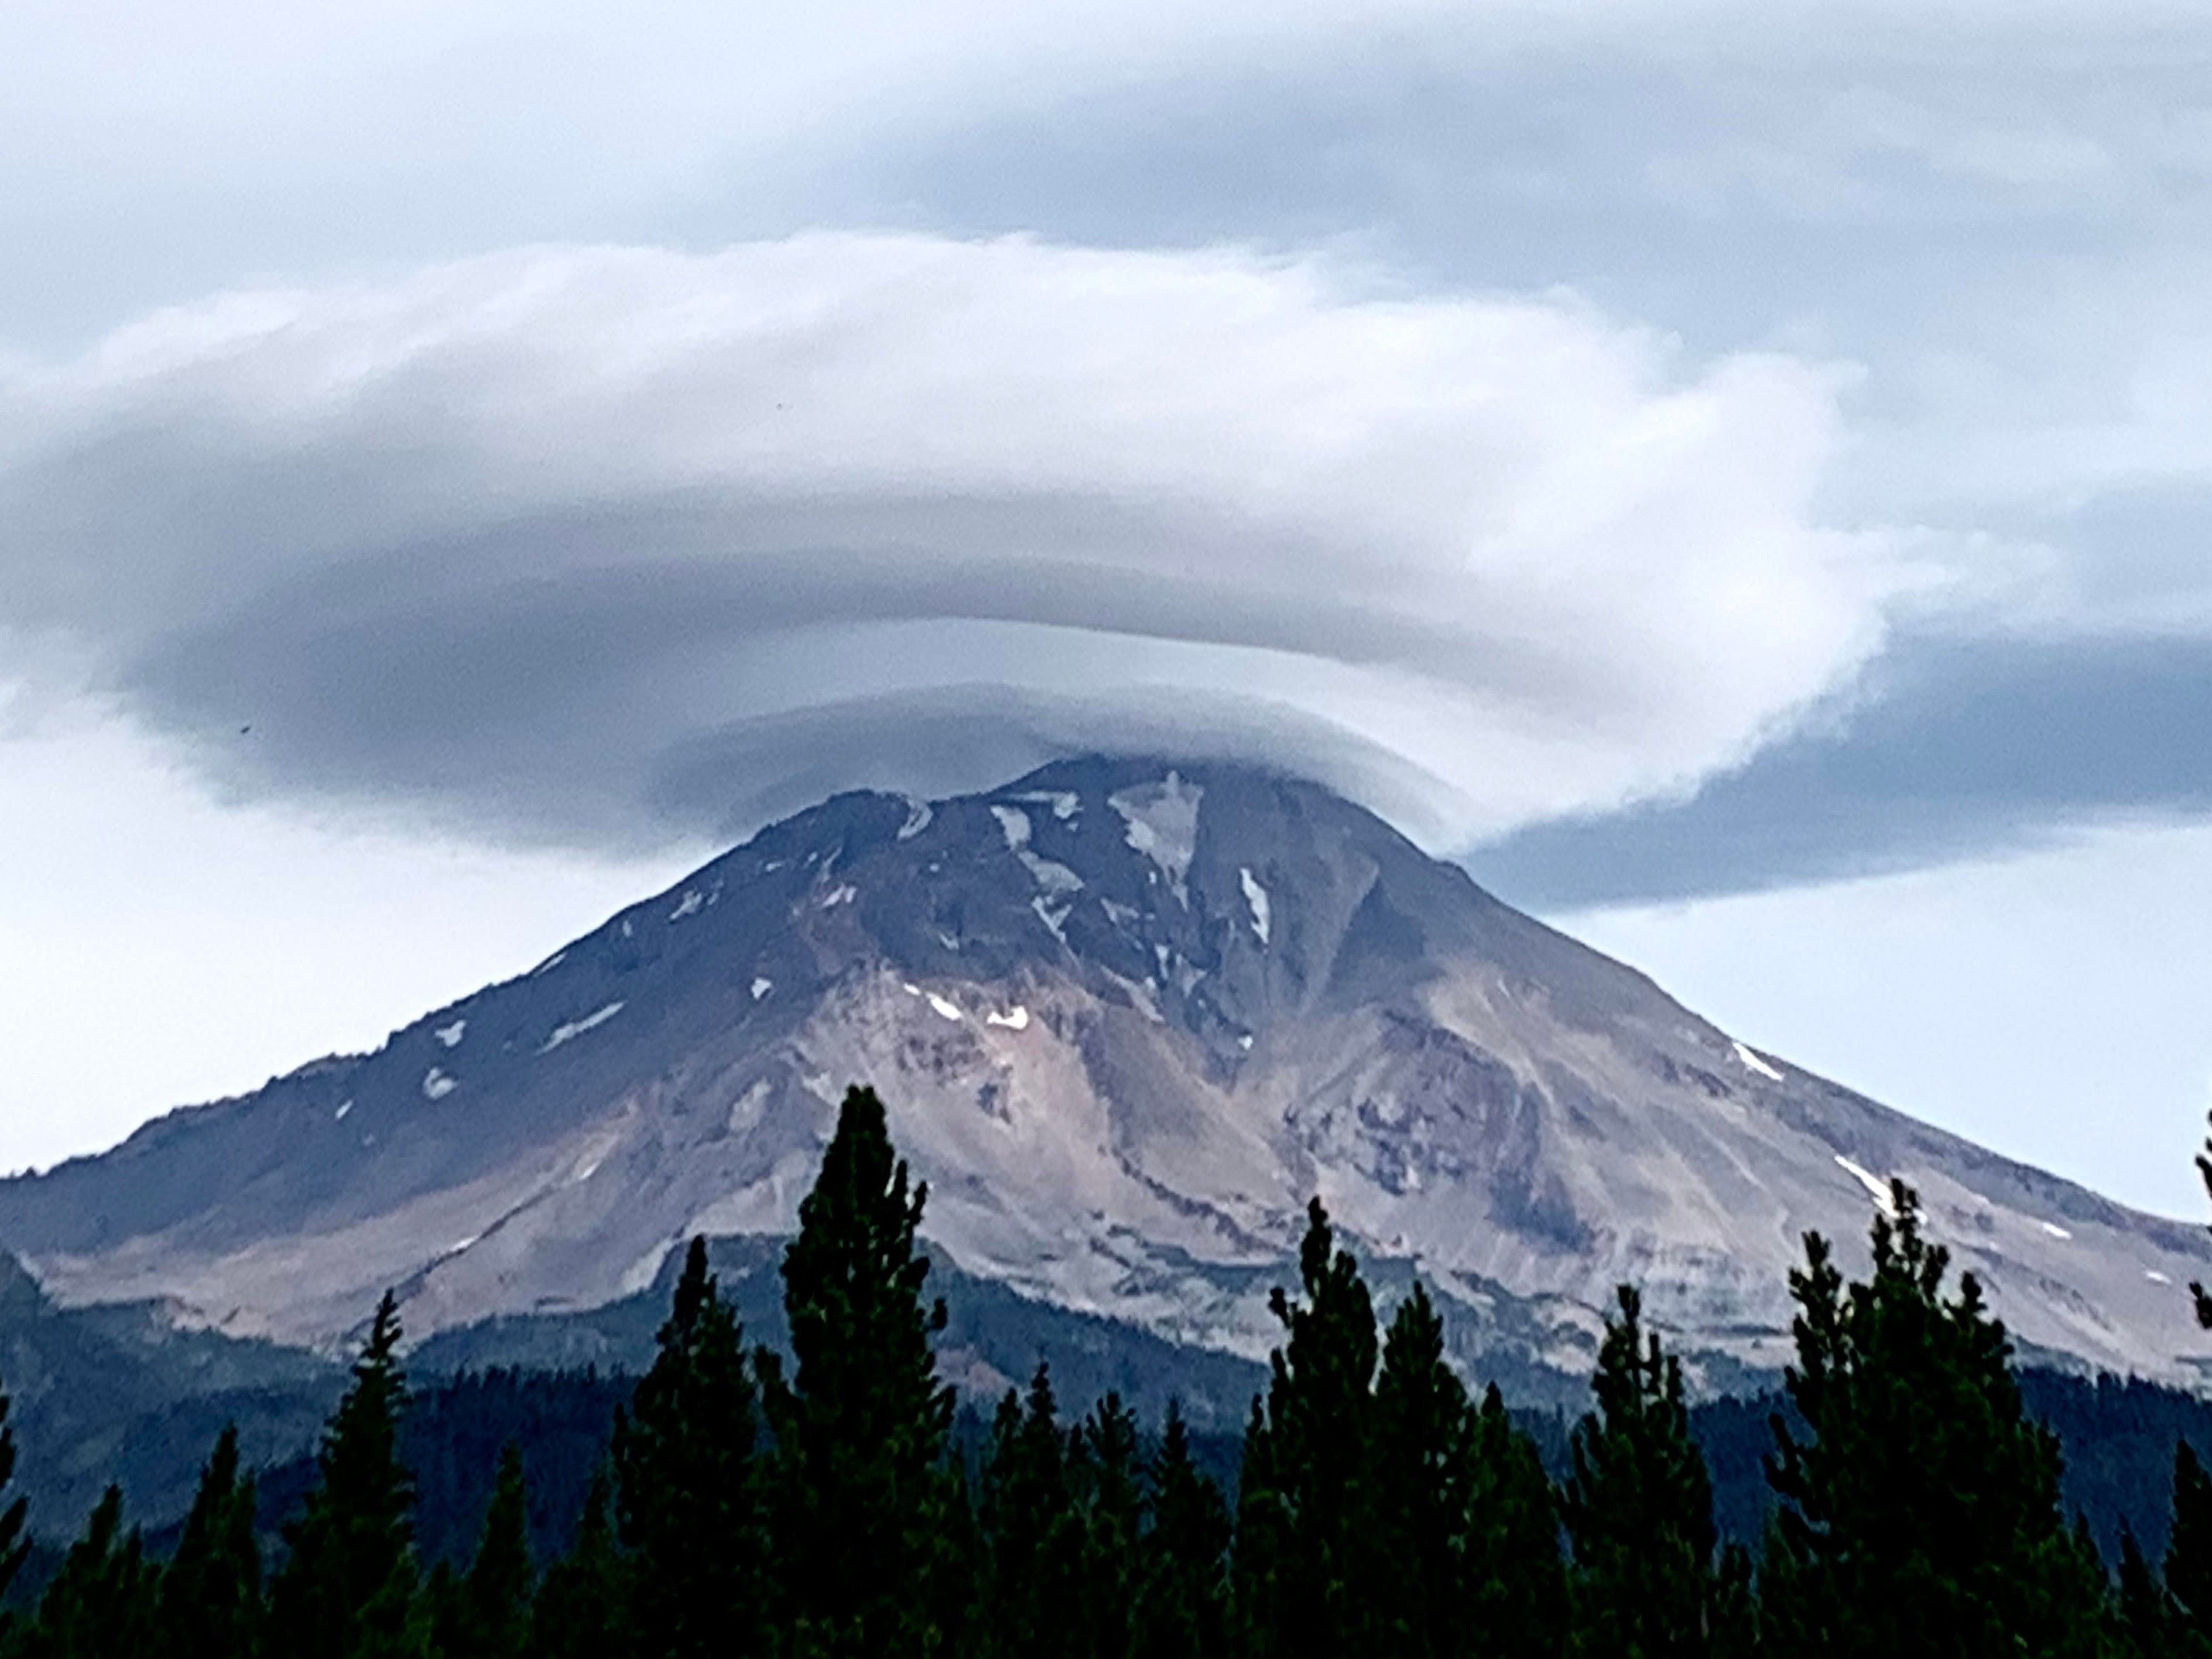 A lenticualr cloud over Mt. Shasta in August of 2020.